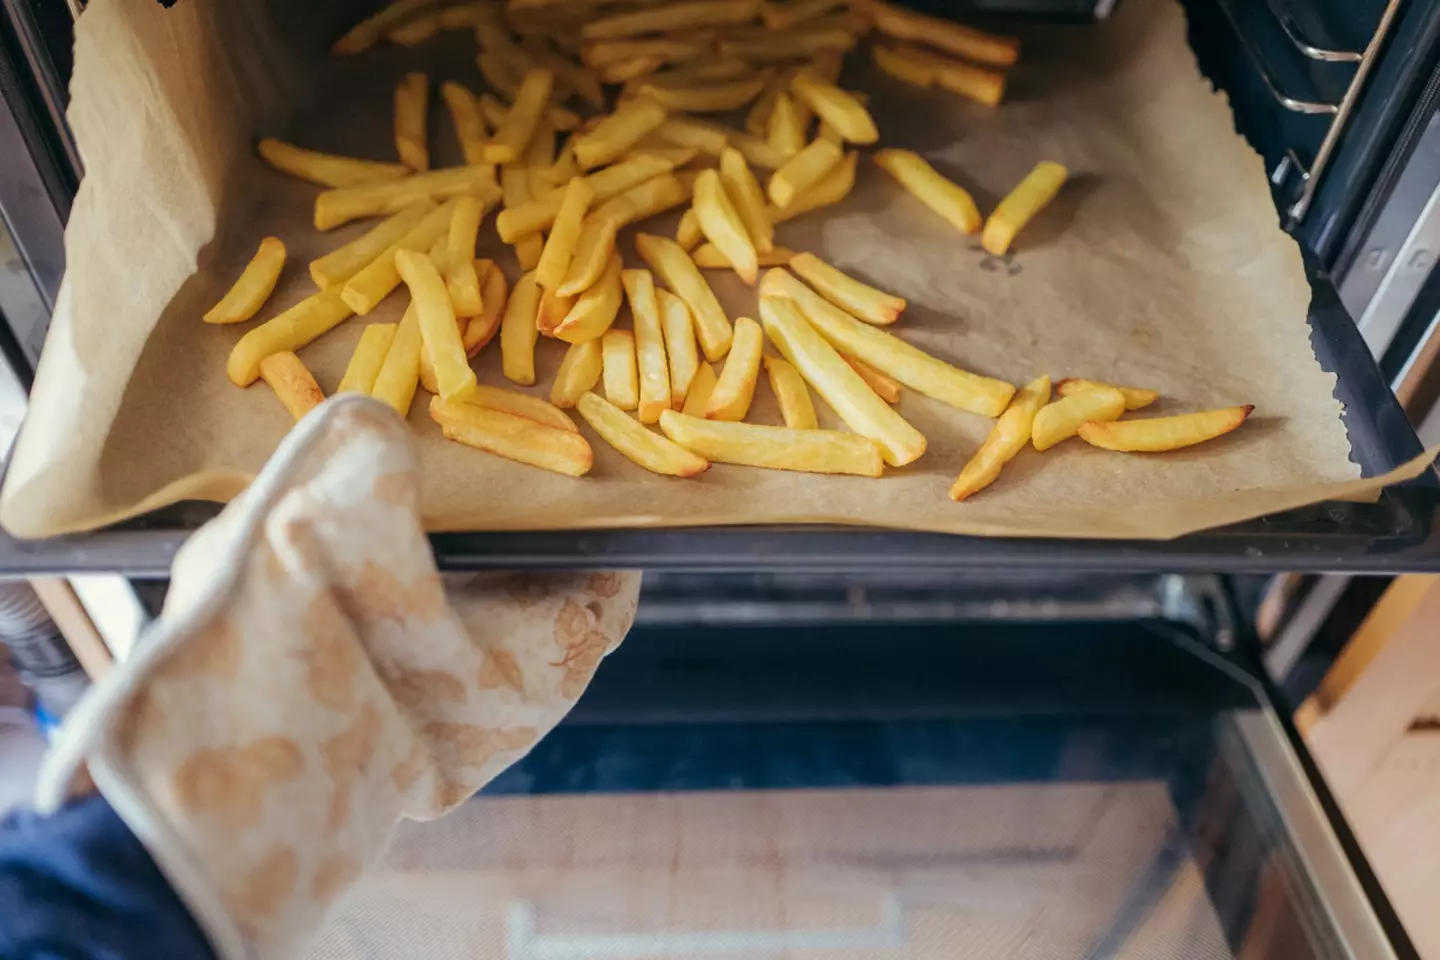 Yup, you've got to turn over all the chips.